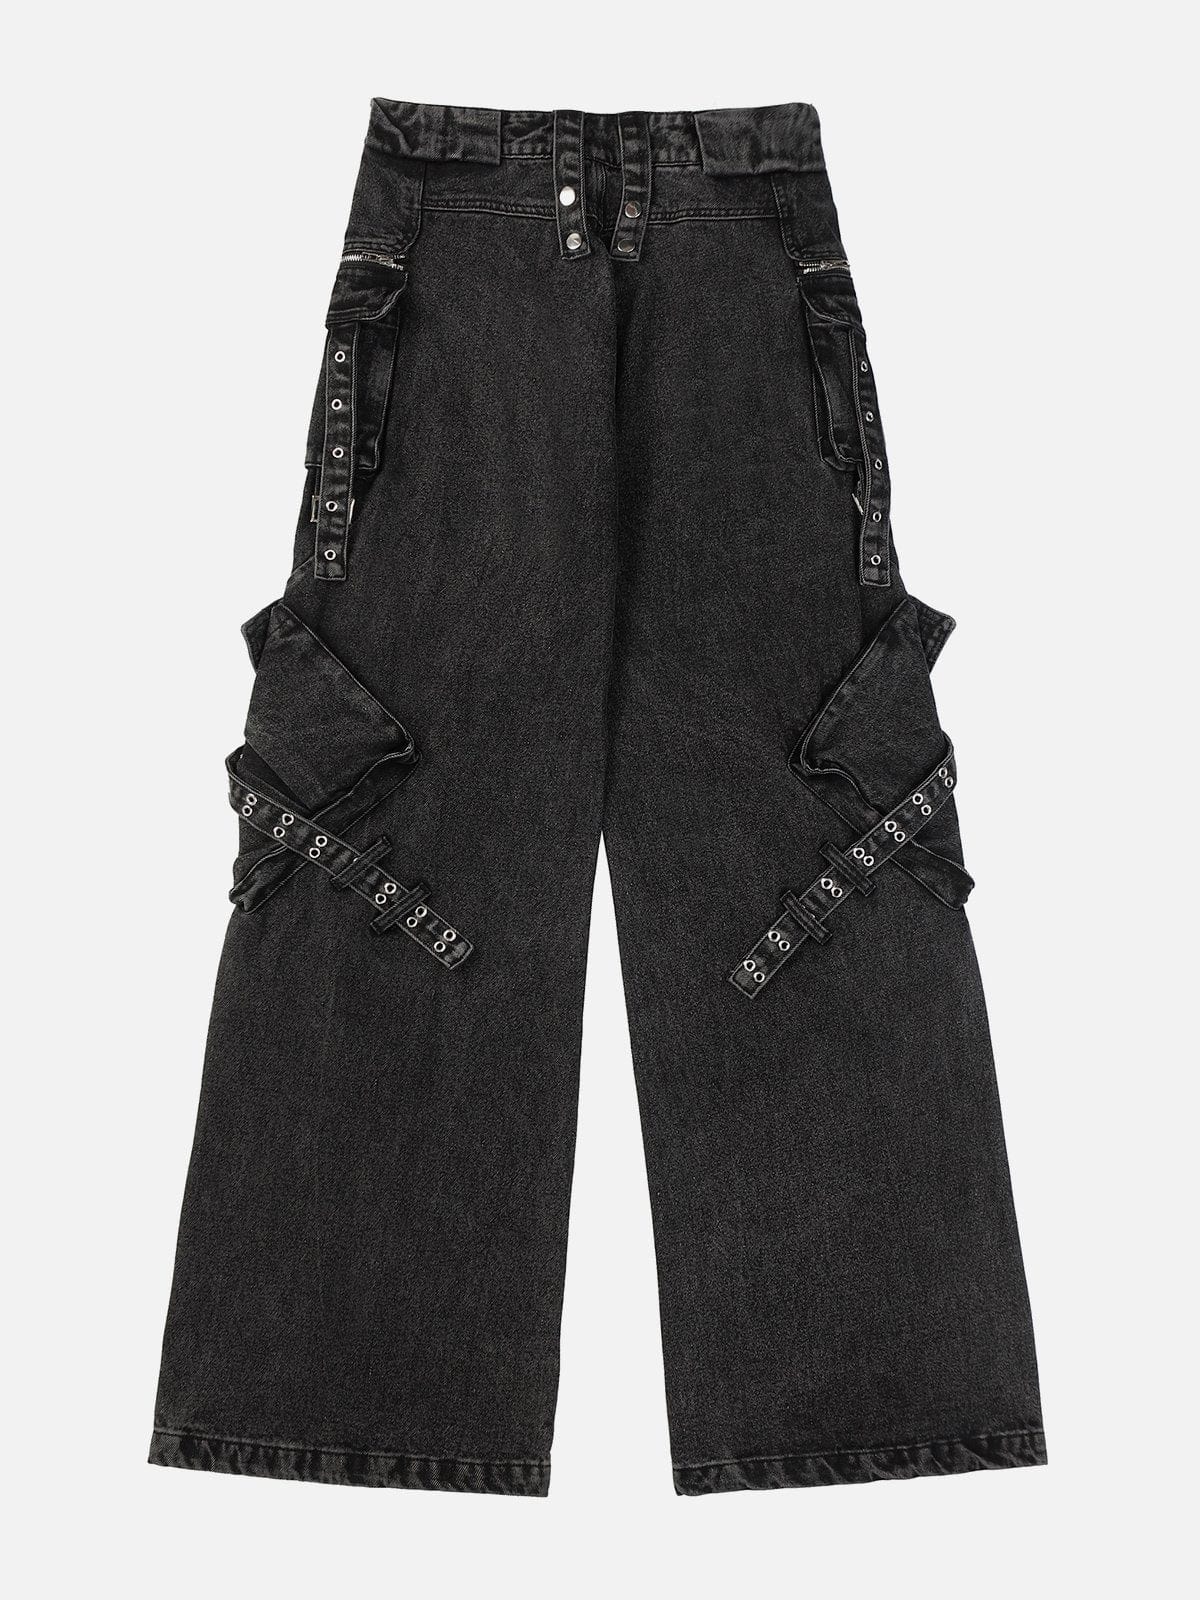 NEV Multi-Zip Perforated Jeans